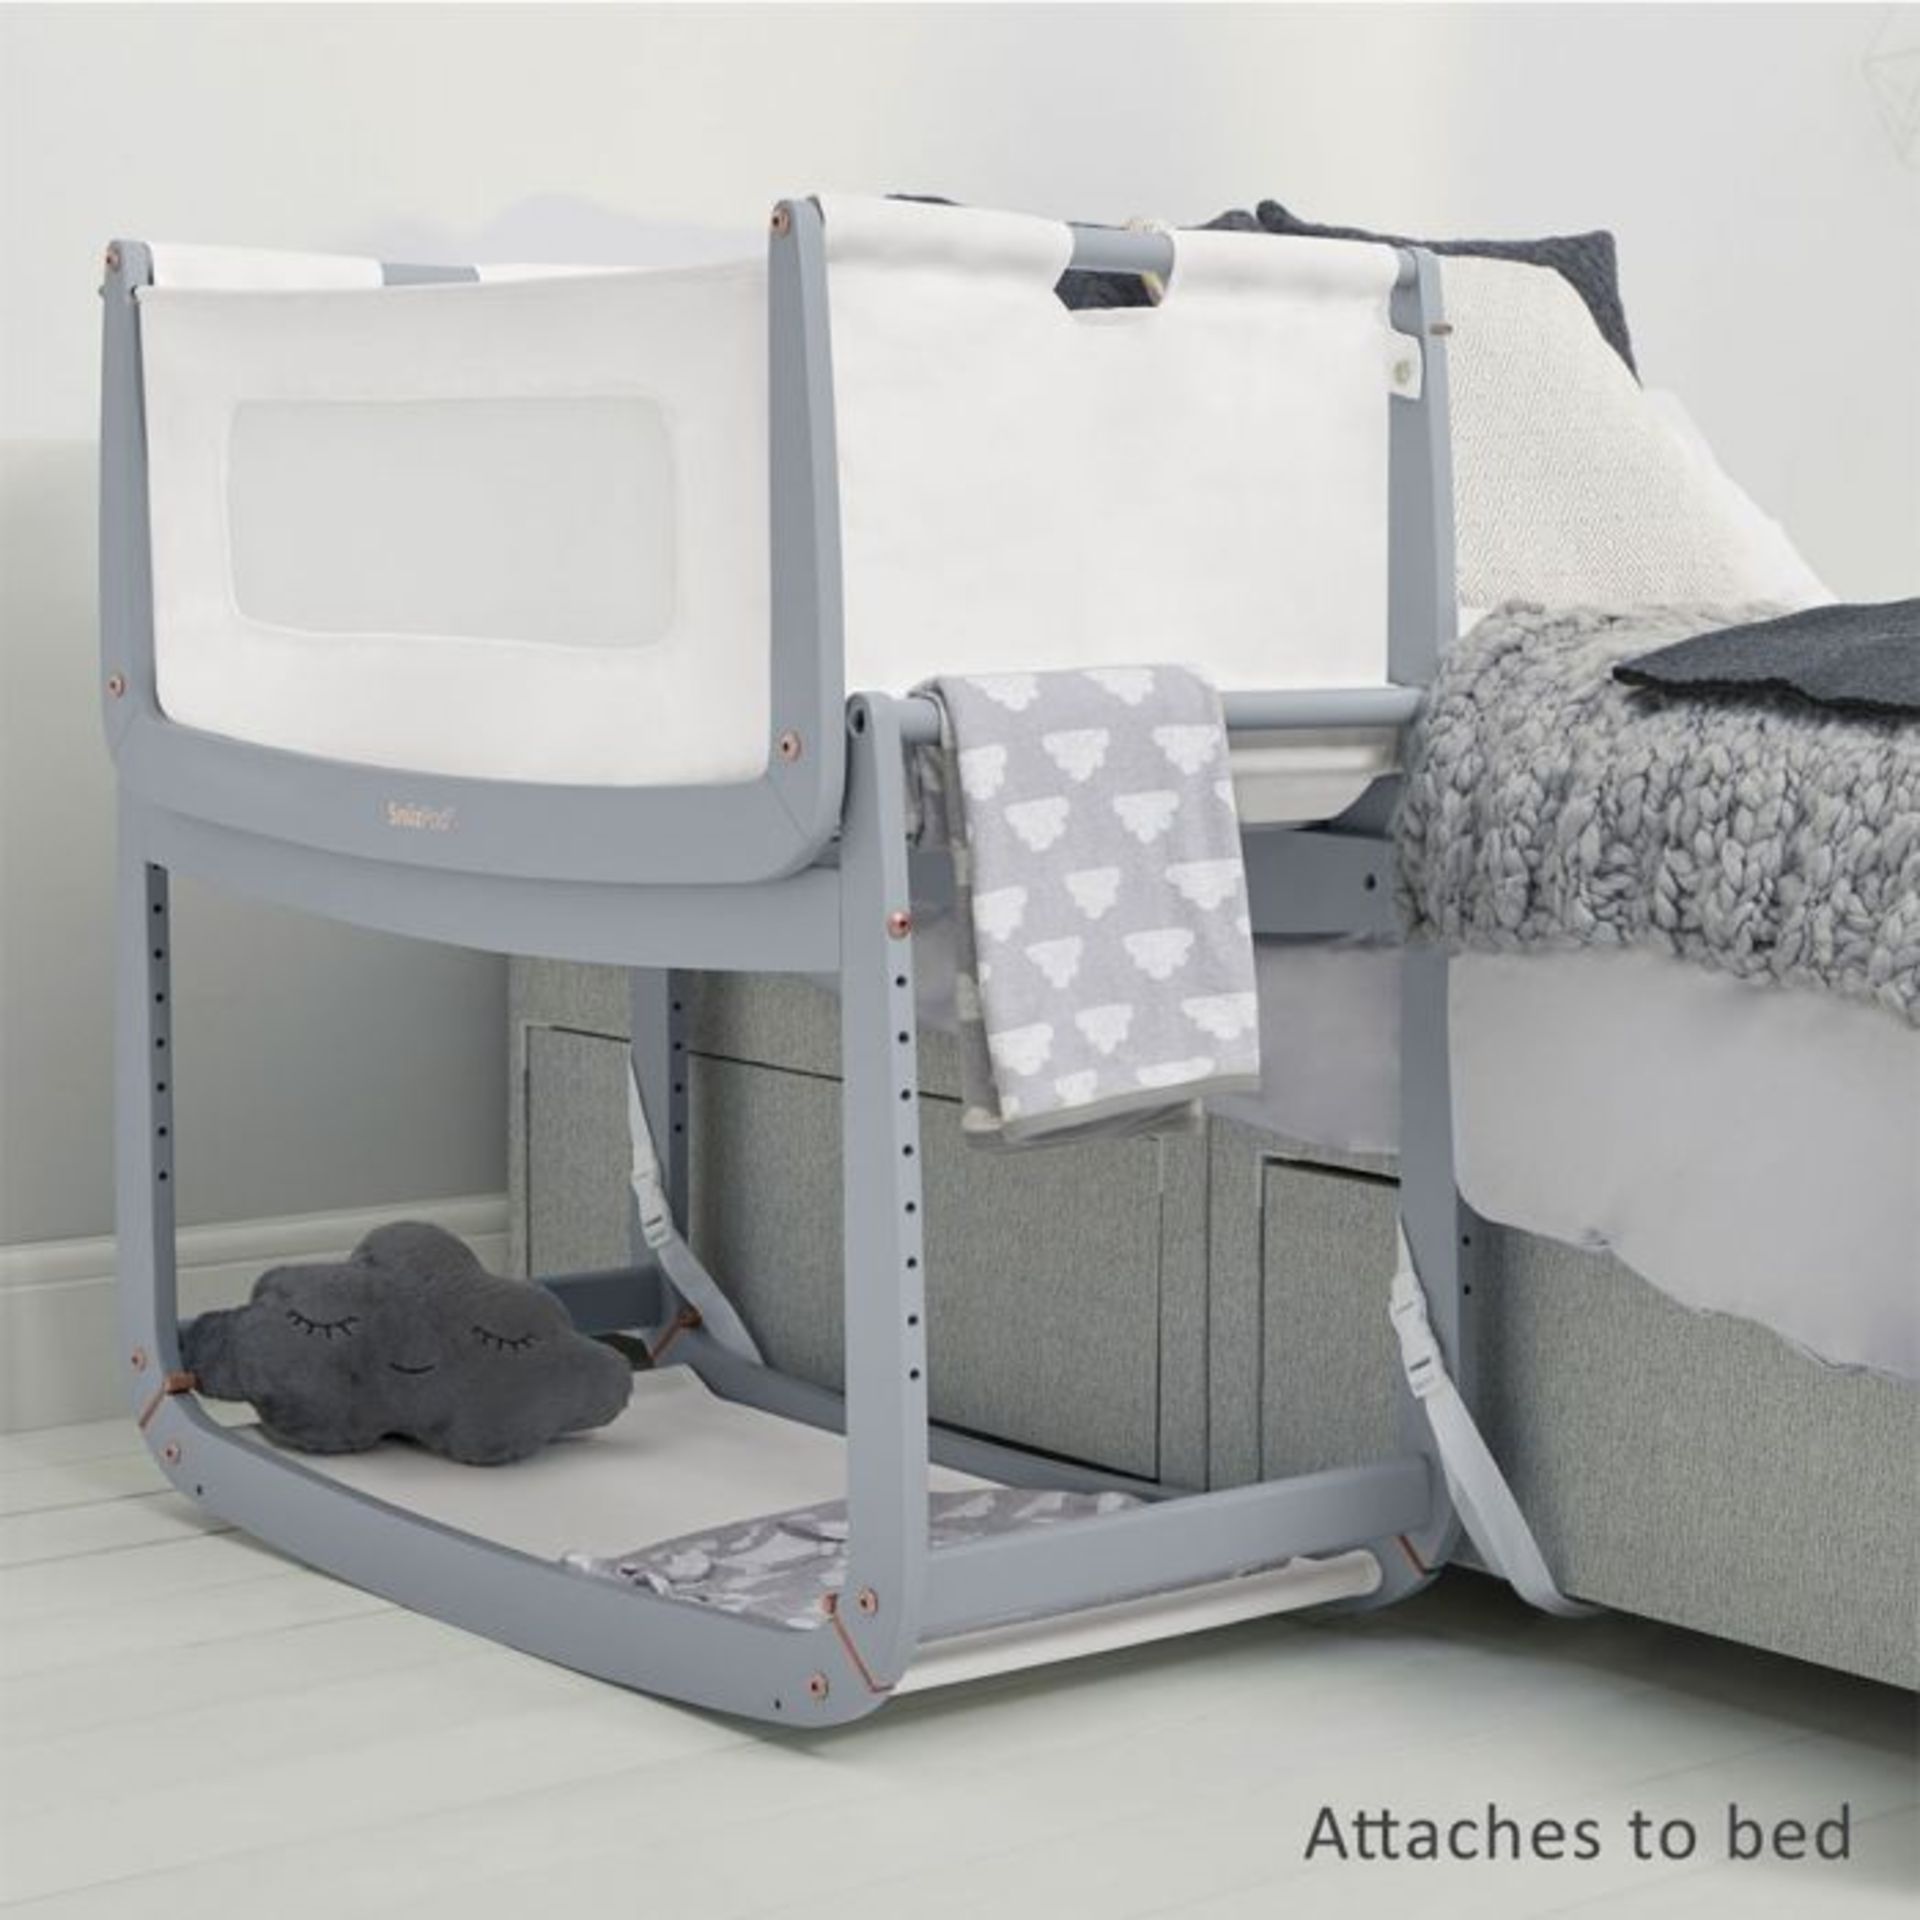 Boxed Snooz Pod 3 Bedside Crib RRP £190 (1017134) (Pictures Are For Illustration Purposes Only) (